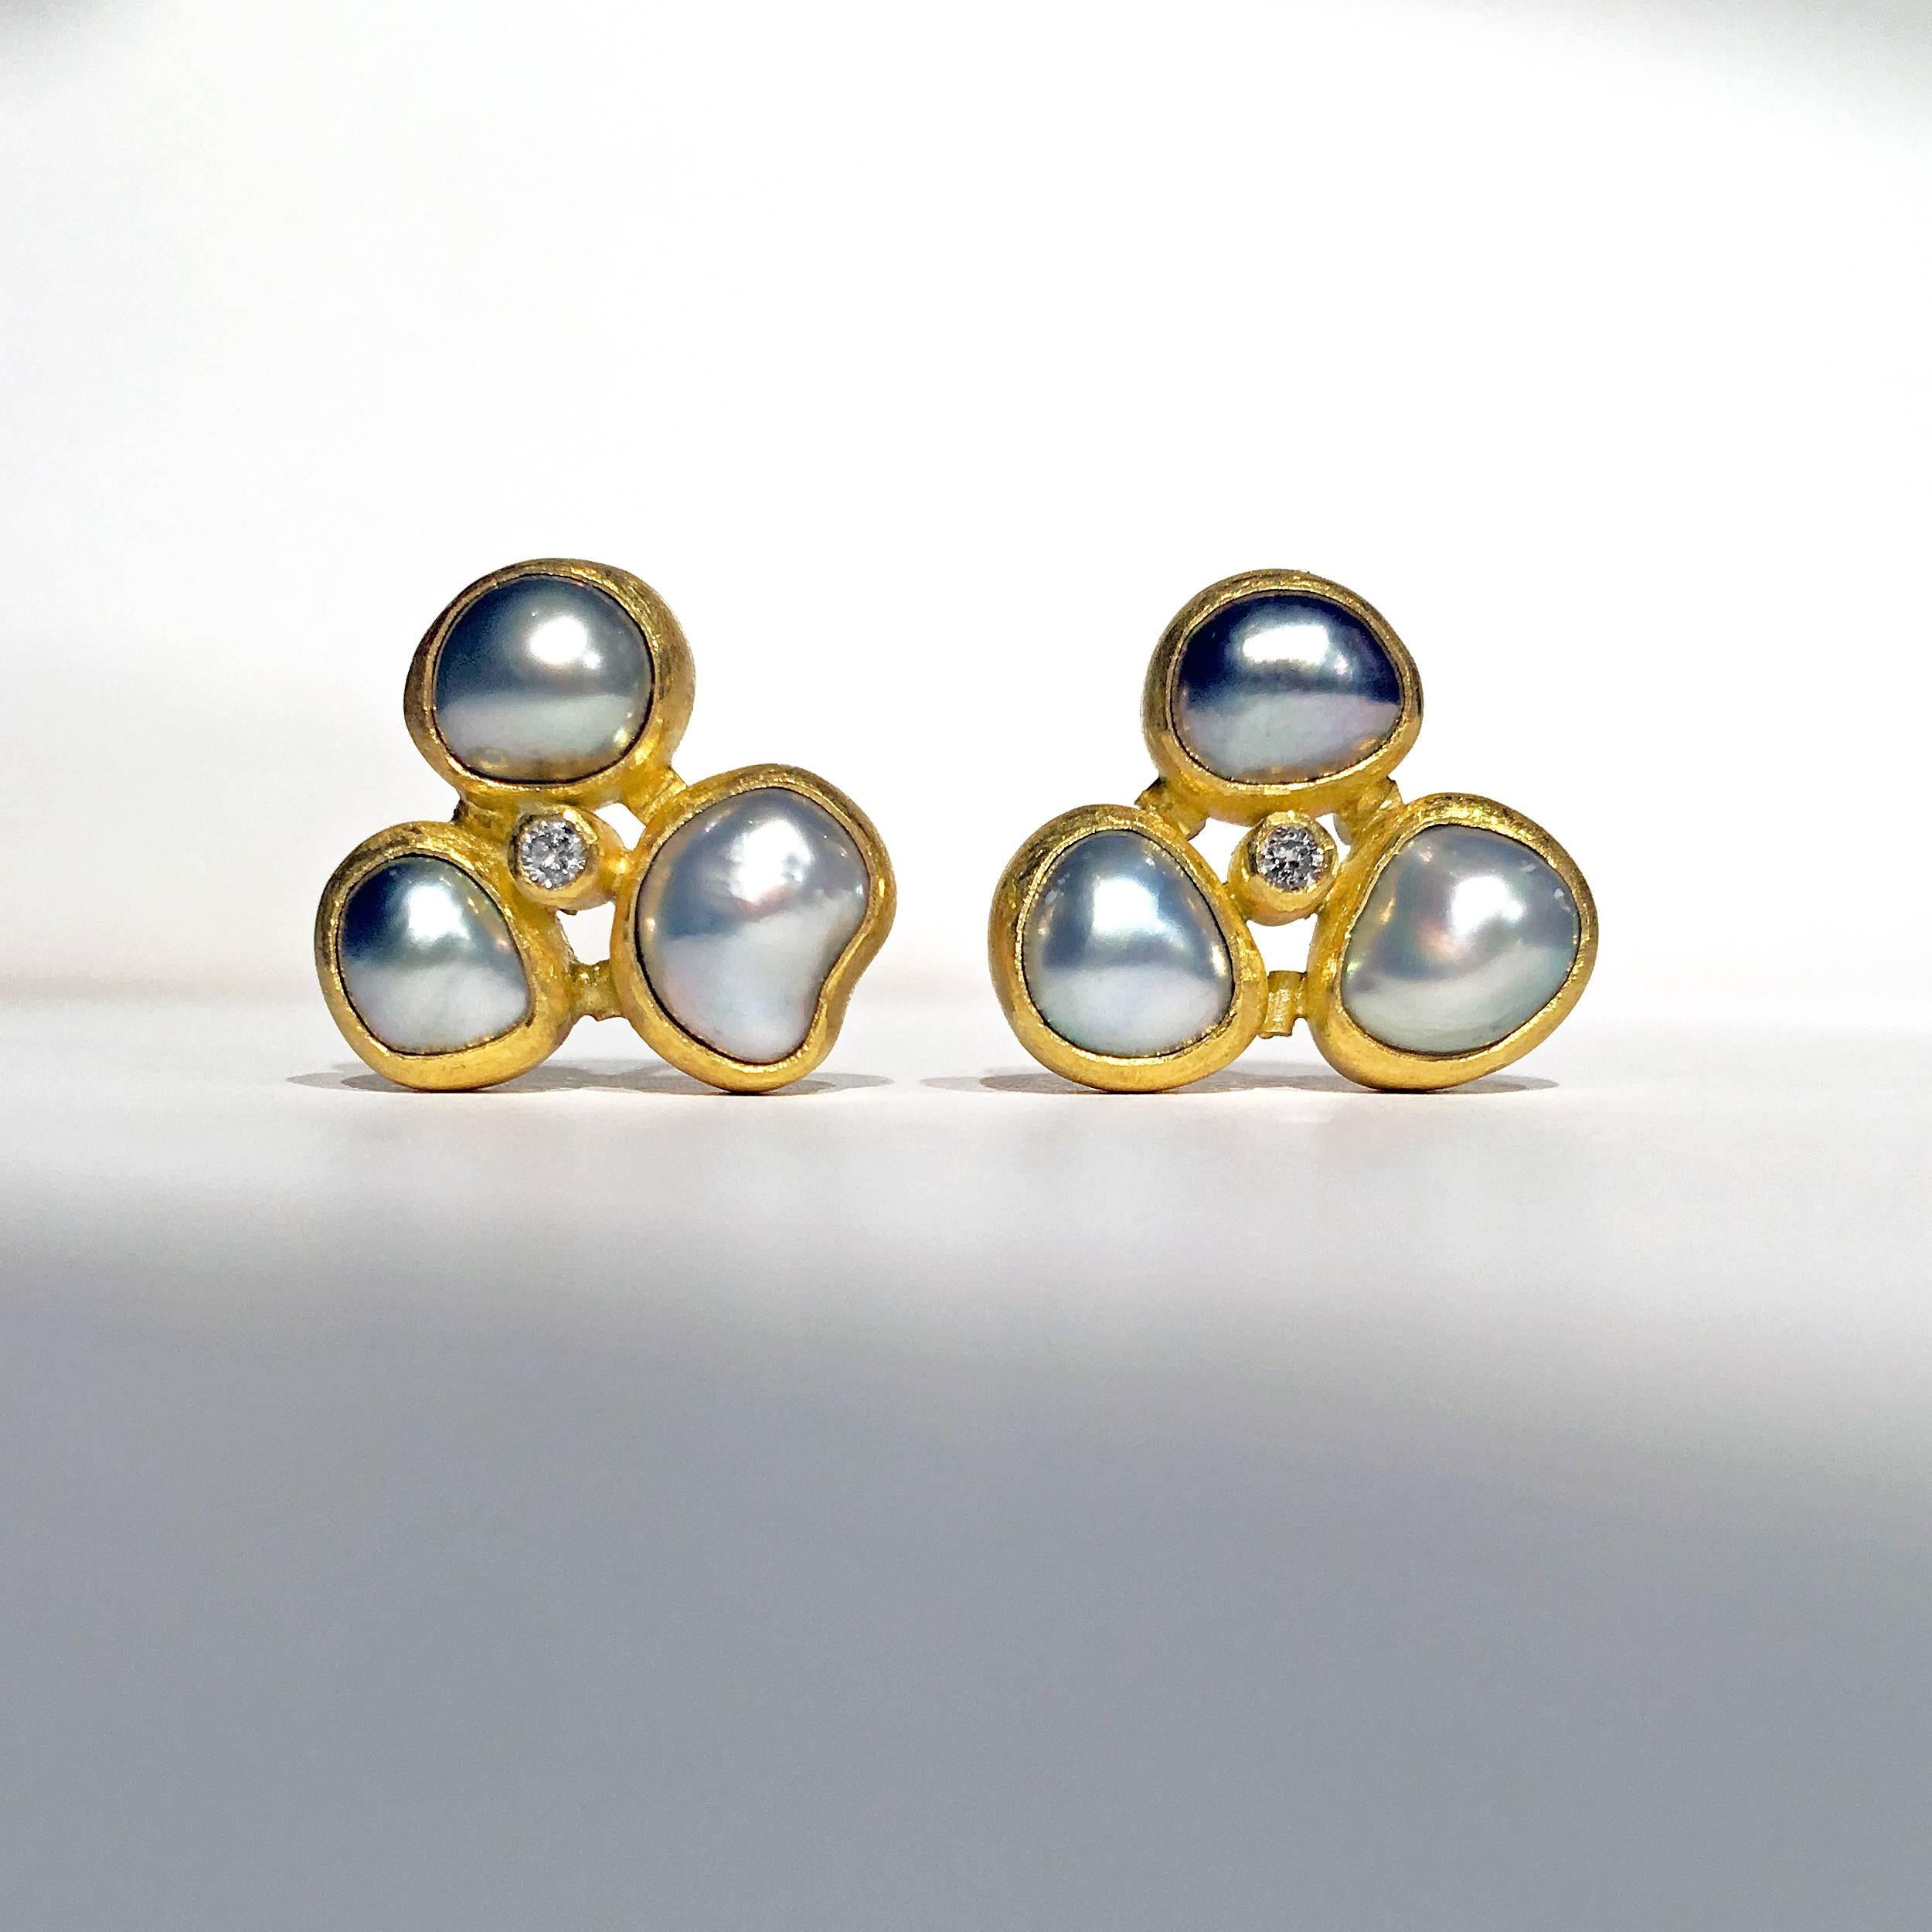 One of a Kind Triple Stud Earrings handcrafted by jewelry artist Petra Class in matte-finished 22k yellow gold featuring six lustrous Tahitian pearls and round brilliant-cut white diamonds on 18k yellow gold posts. Stamped and hallmarked 18k / 22k /